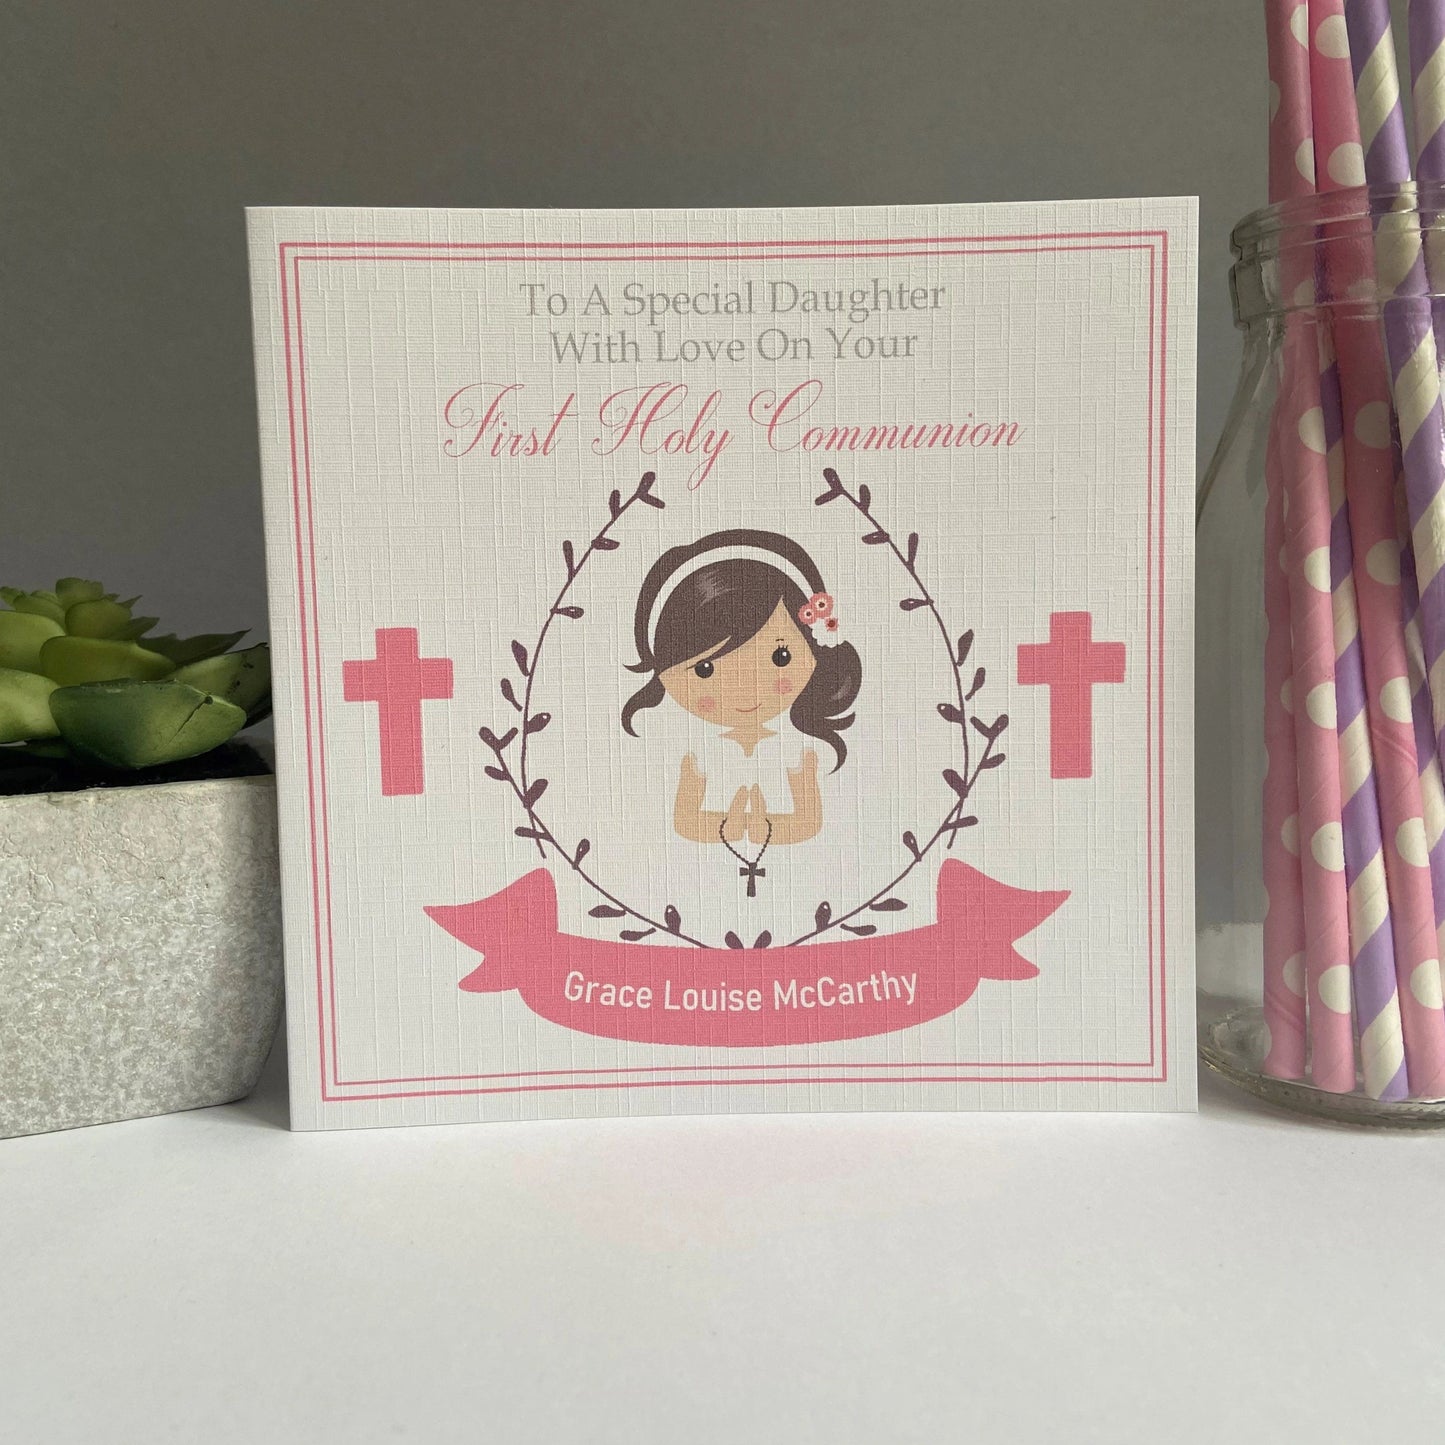 Personalised Handmade Firsty Holy Communion Card - 2 Size Options Daughter Granddaughter Confirmation Baptism Niece